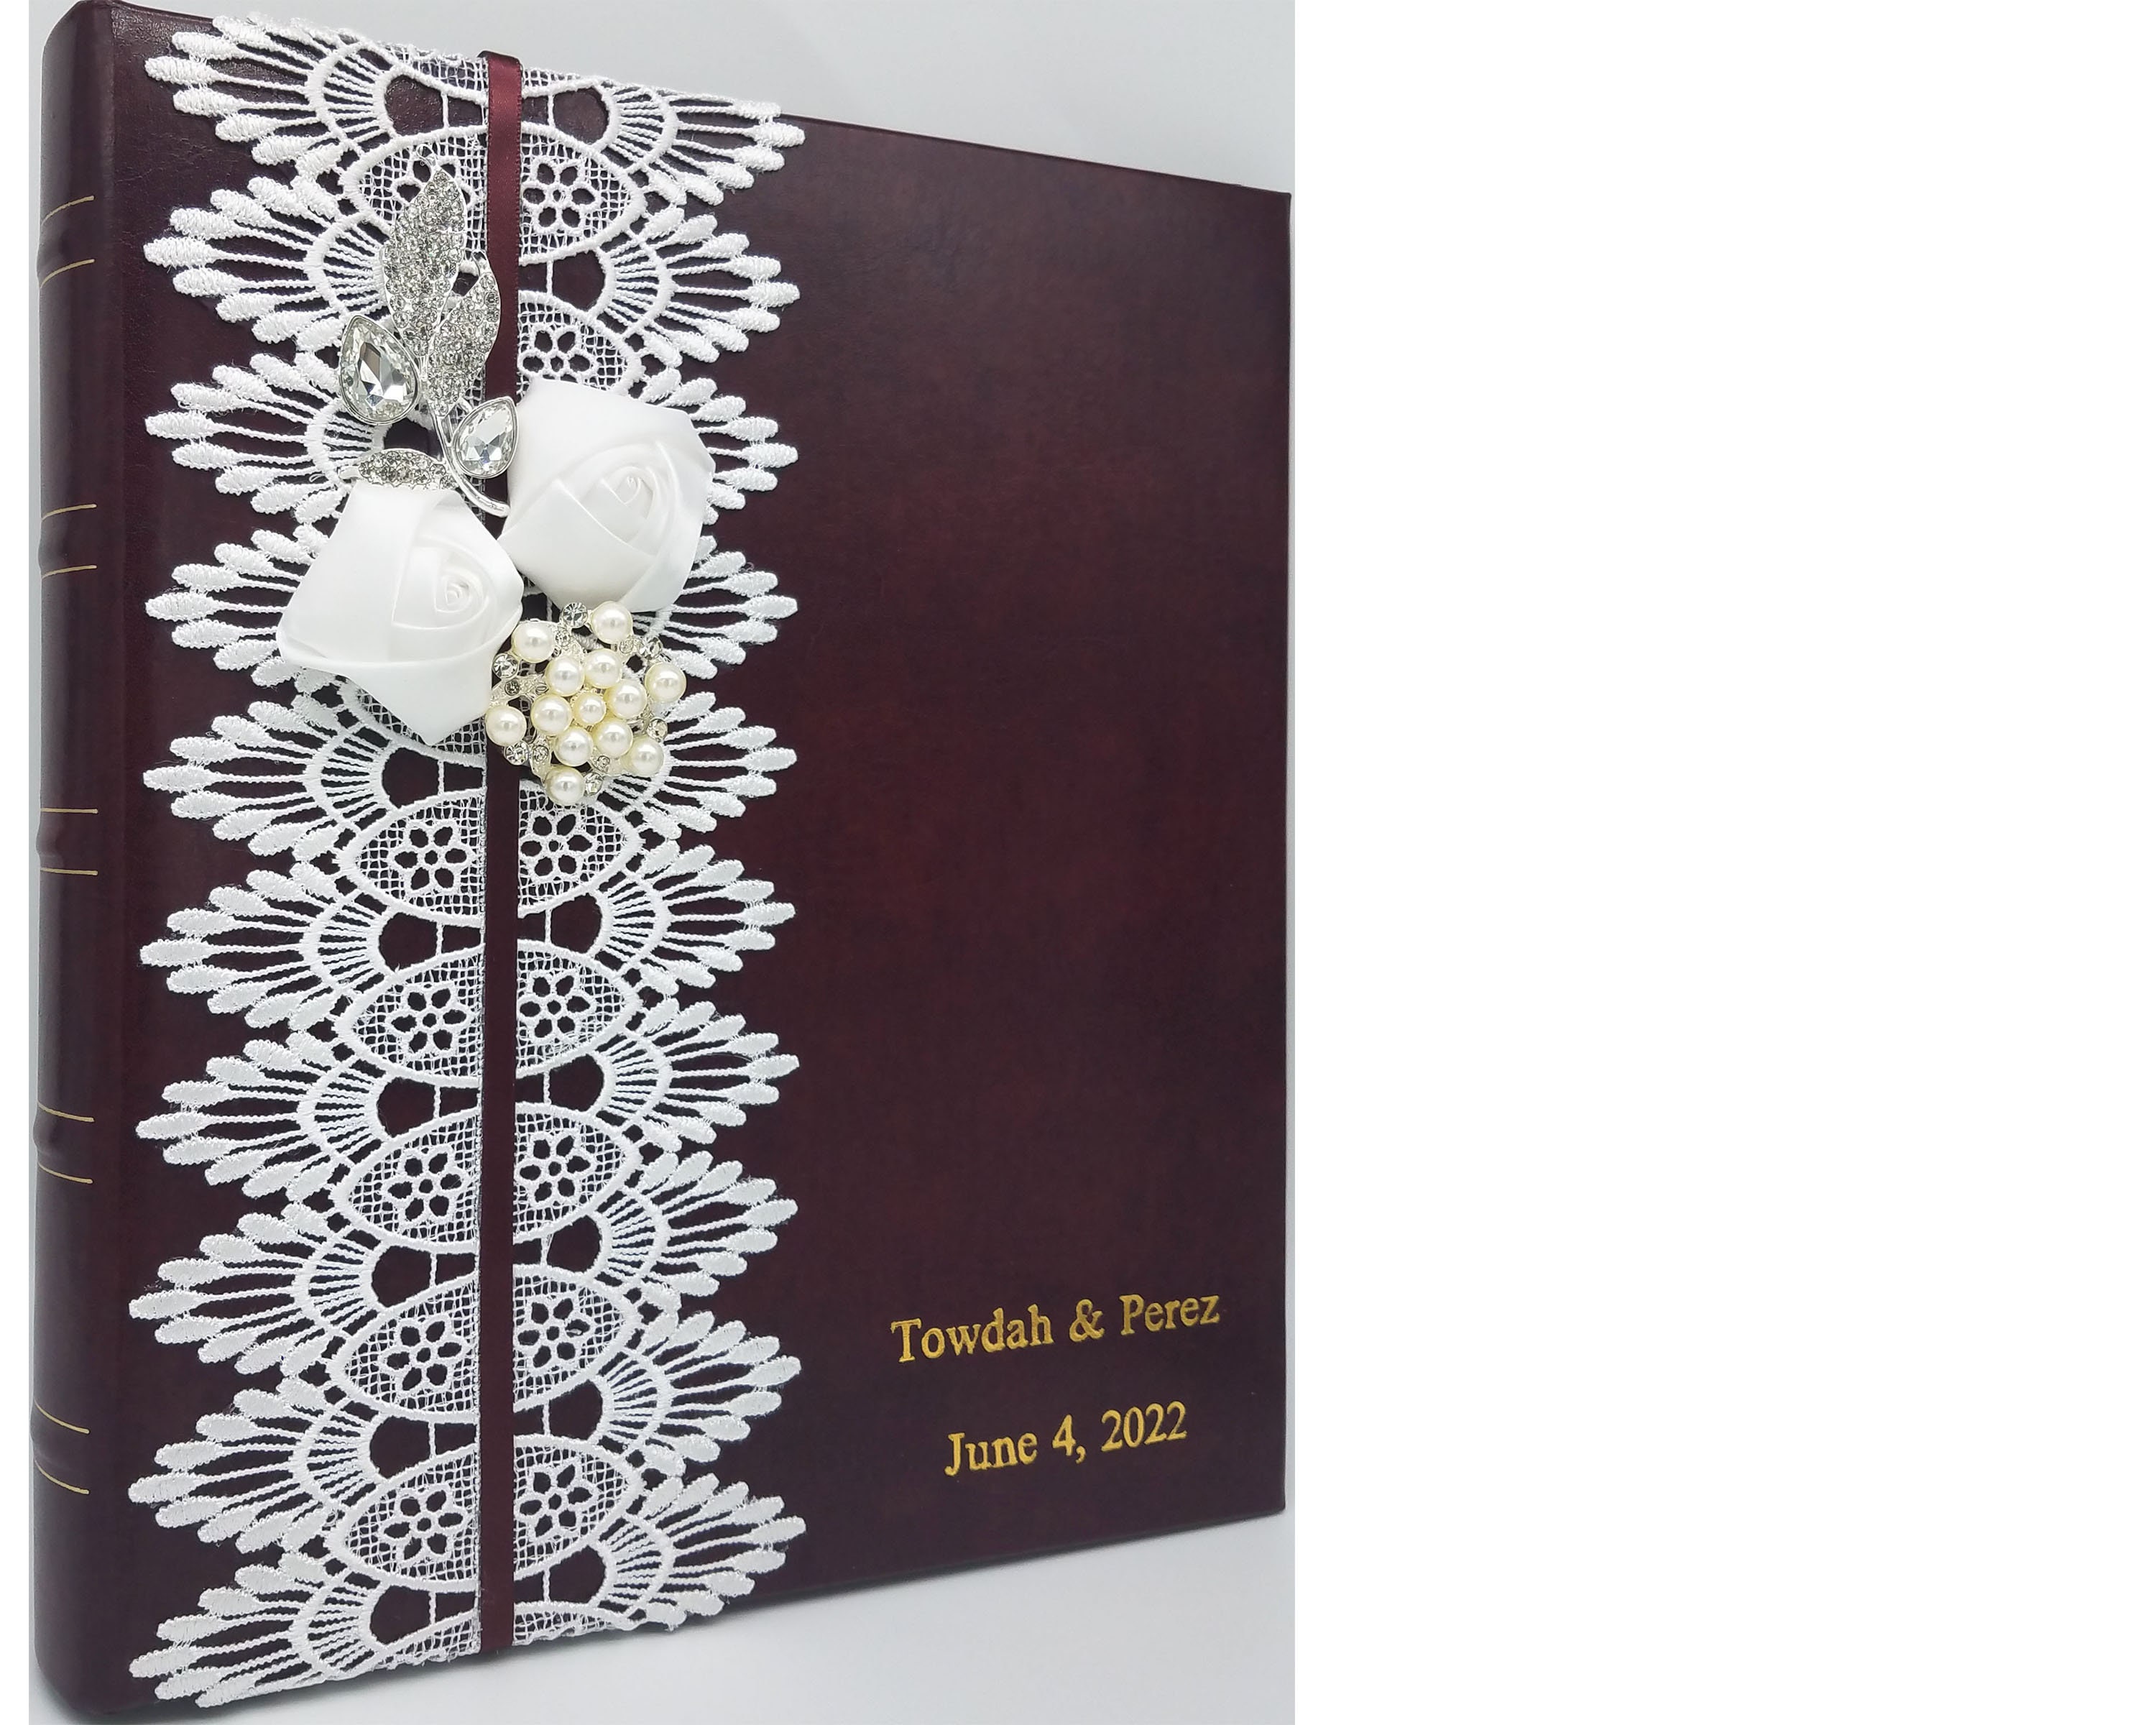 Large Capacity 8x10 Photo Albums. Classic Leather Photo Album. 3-ring  Binder Photo Album With Refill Pages Available. Weddings Family 